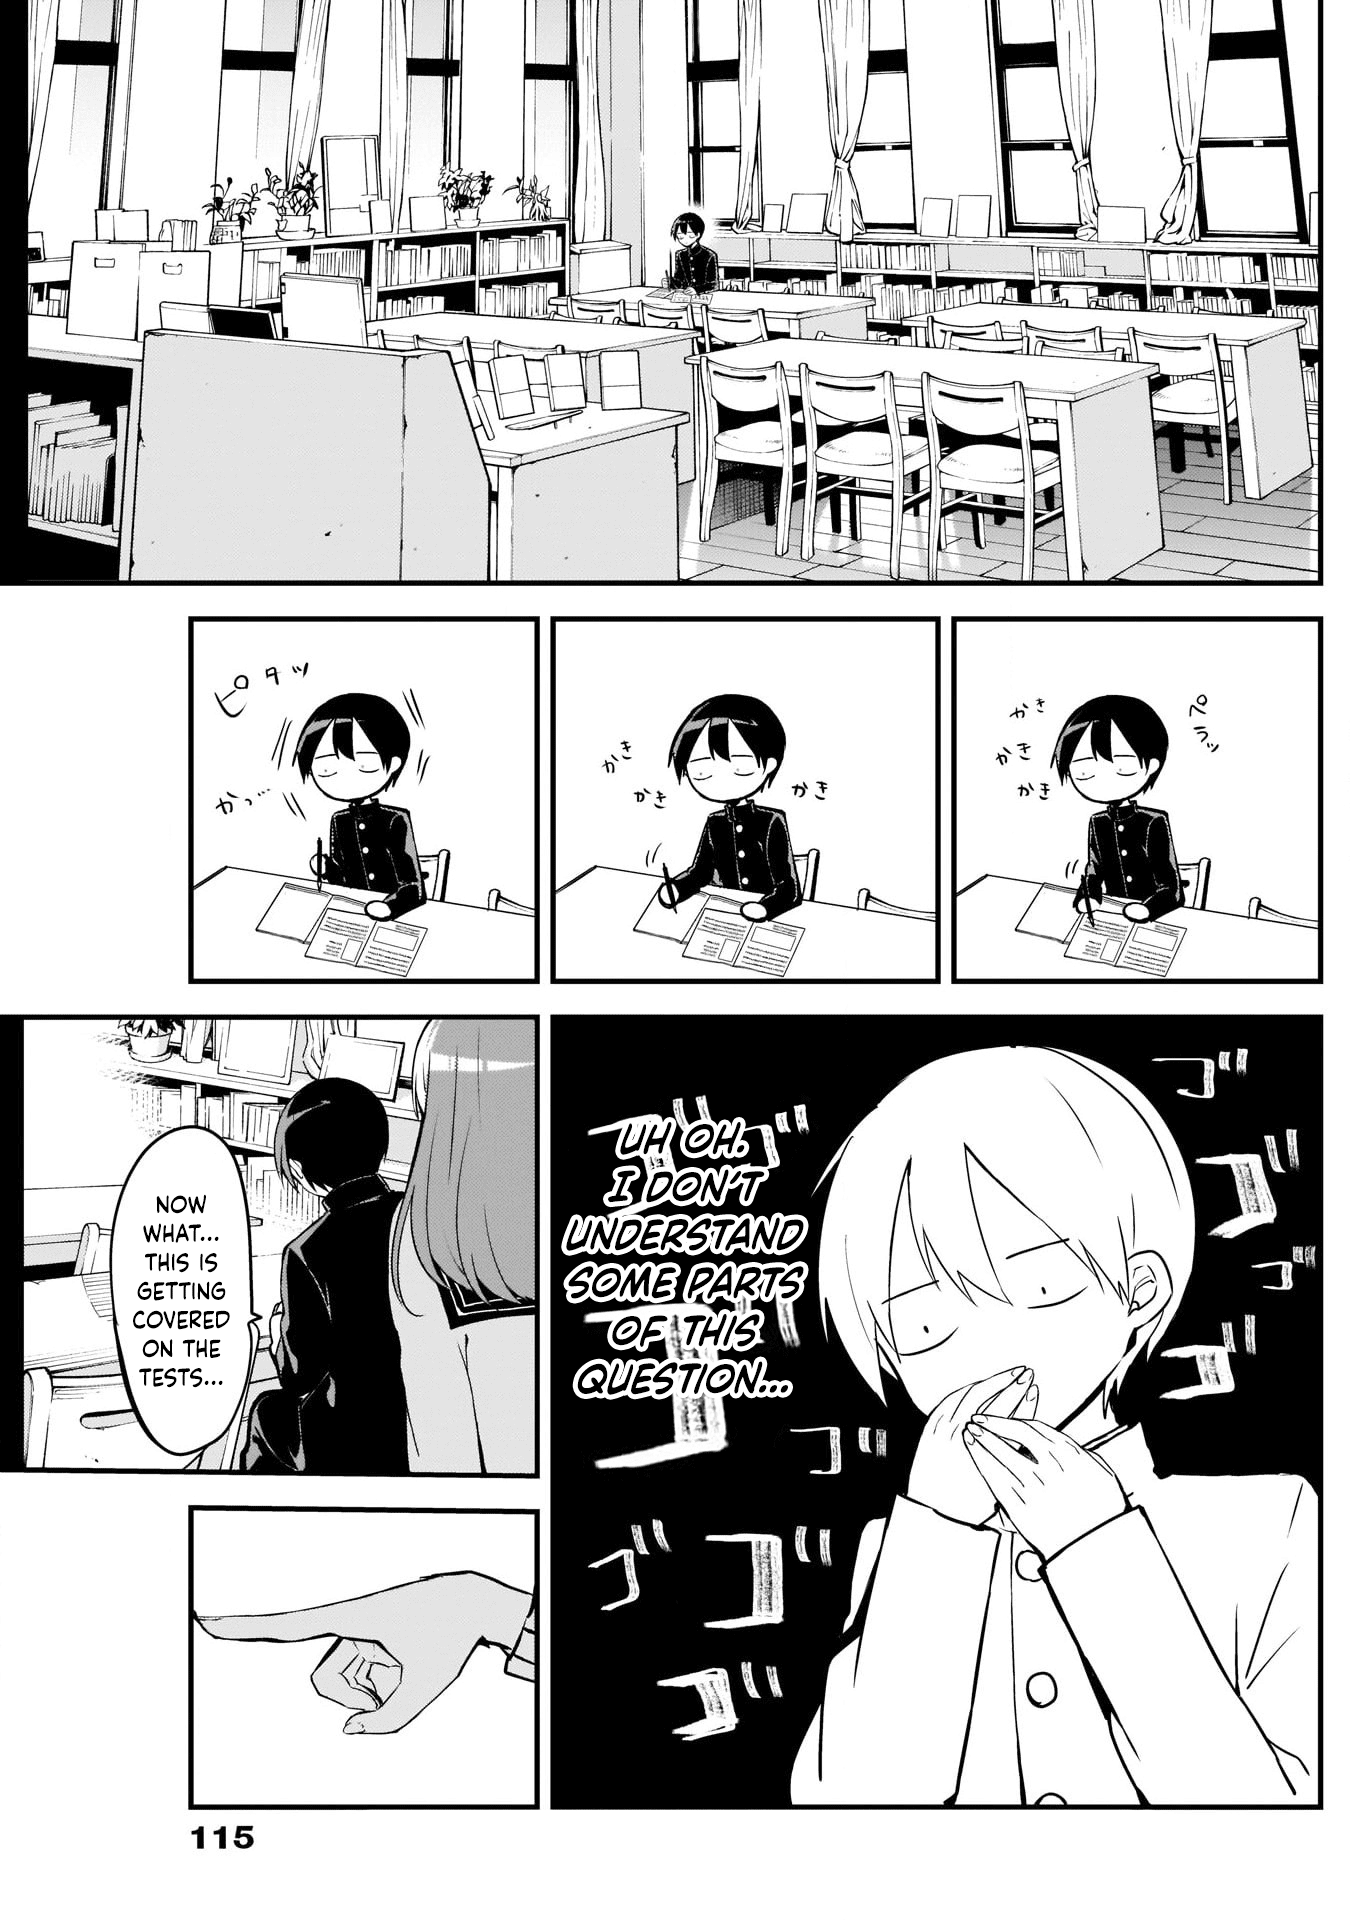 Kubo-San Doesn't Leave Me Be (A Mob) - Page 3